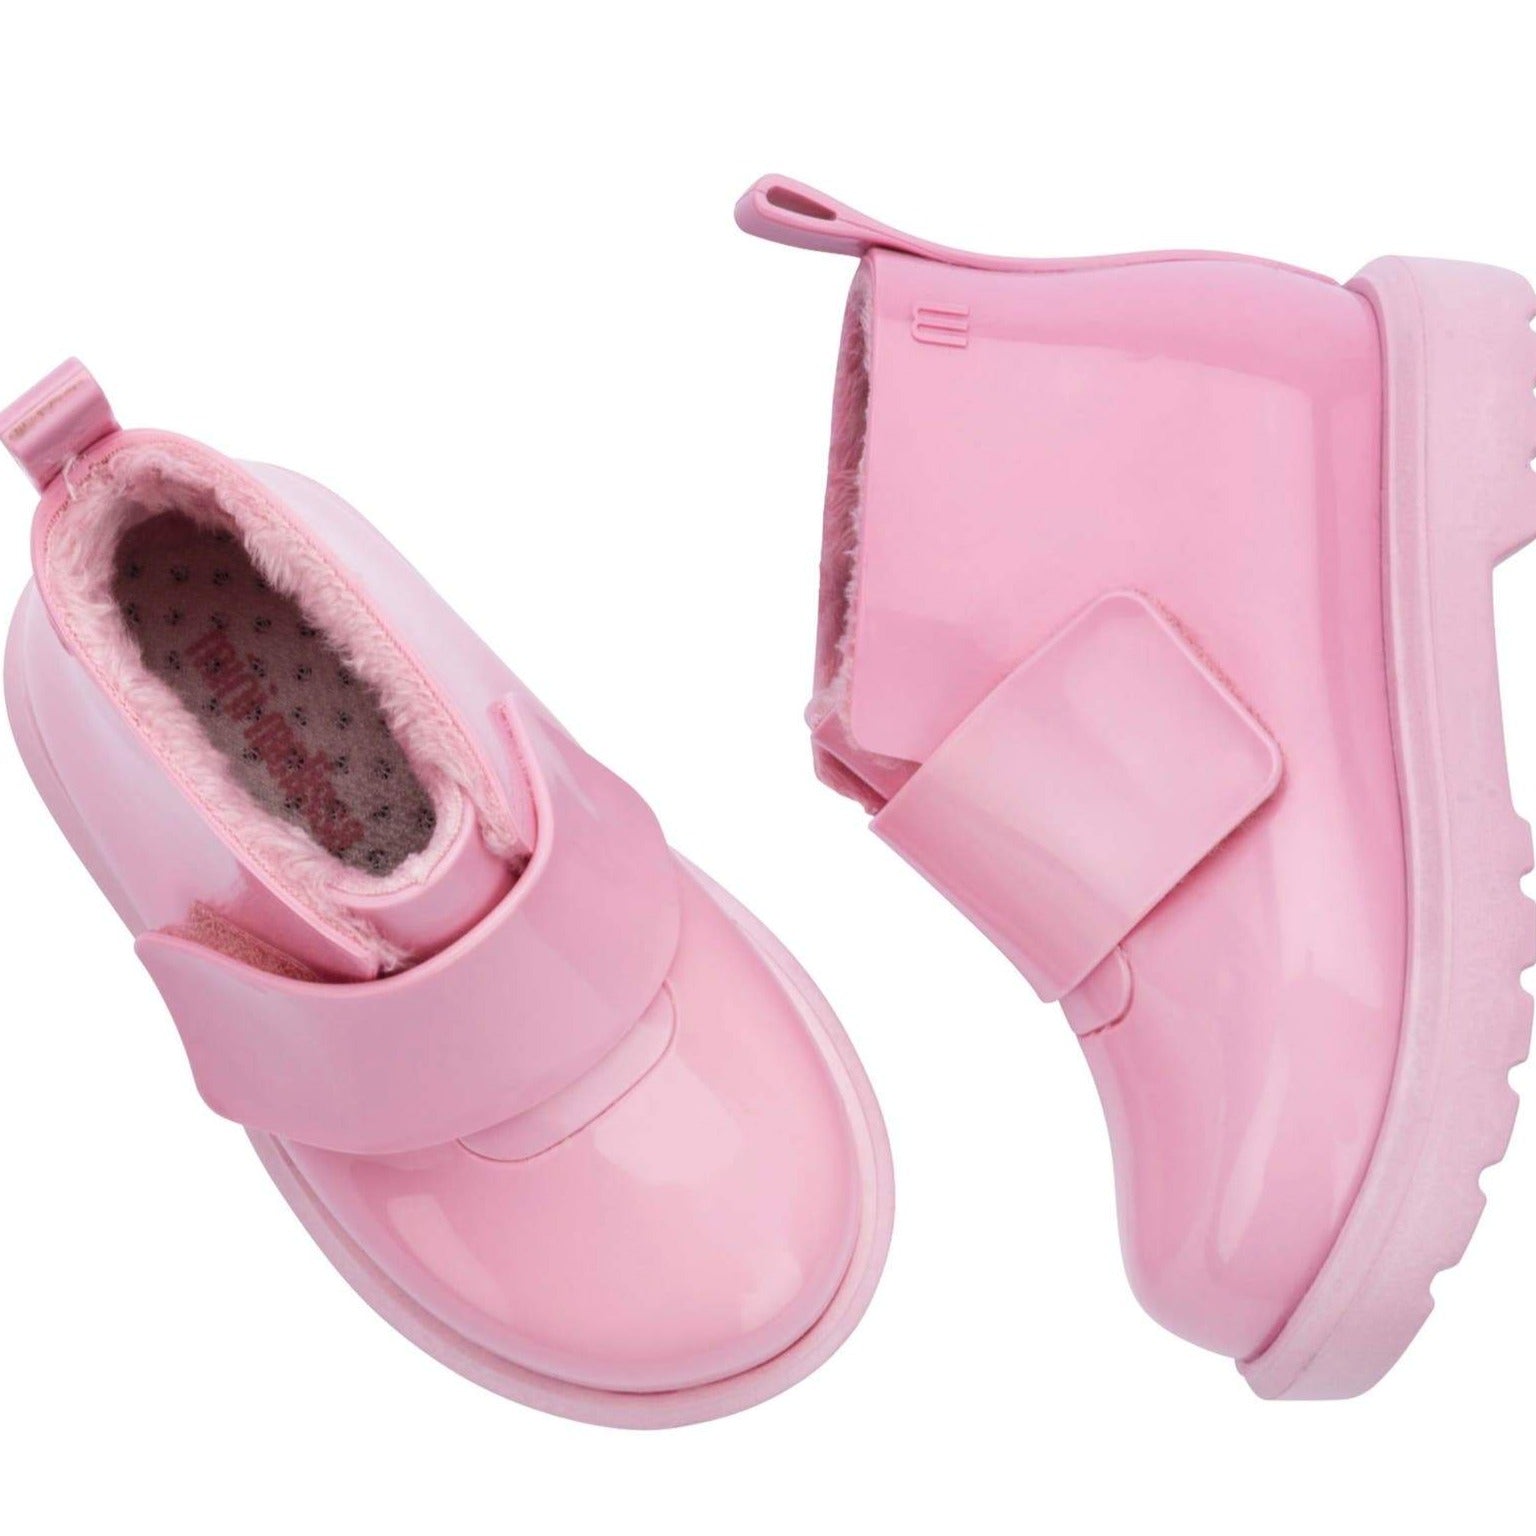 faux fur lined chelsea boot in pink